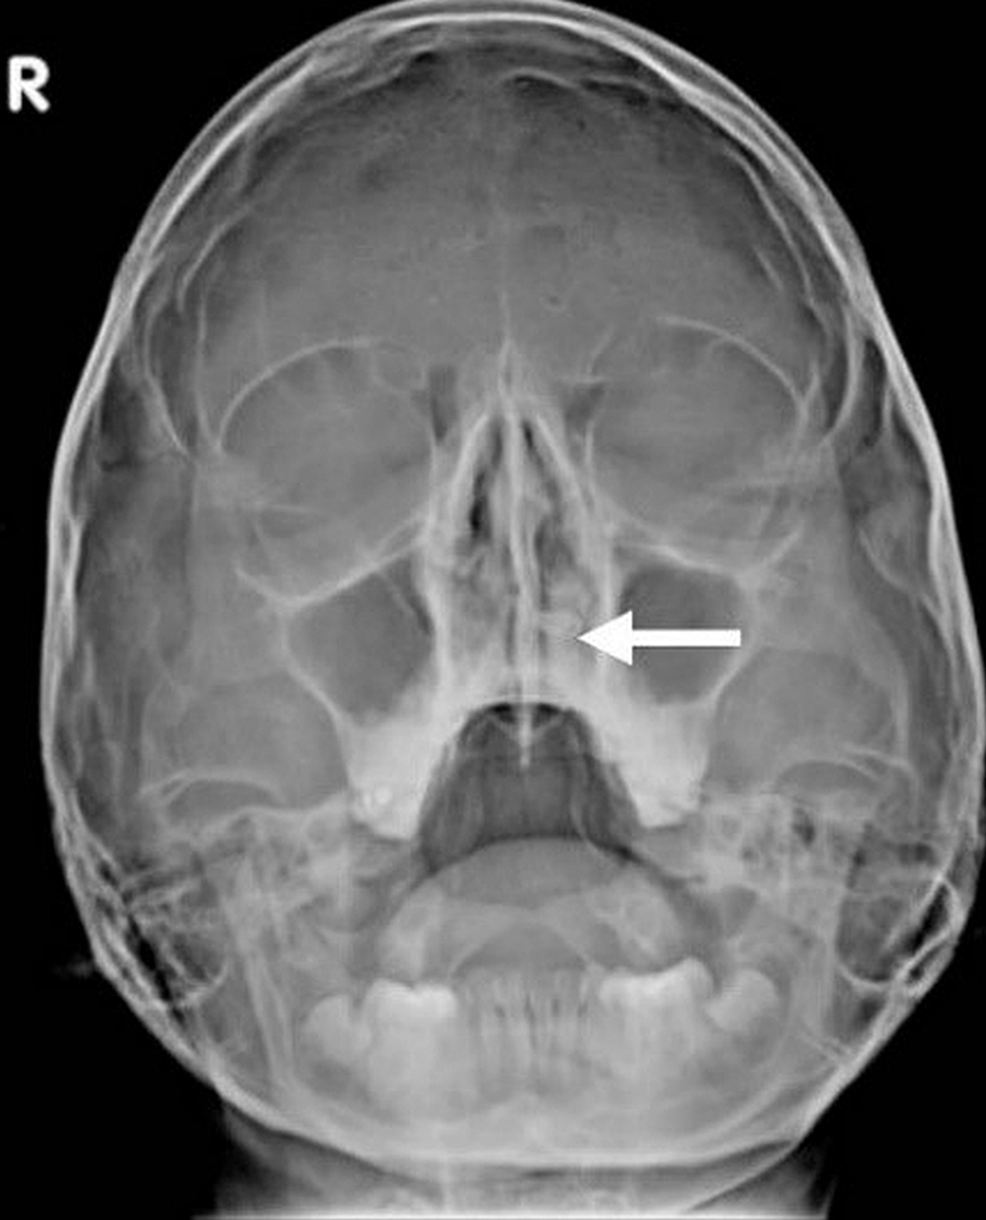 Plain-x-ray-shows-the-radiopaque-structure-in-the-left-nasal-cavity,-embedded-in-the-hard-palate-(white-arrow).